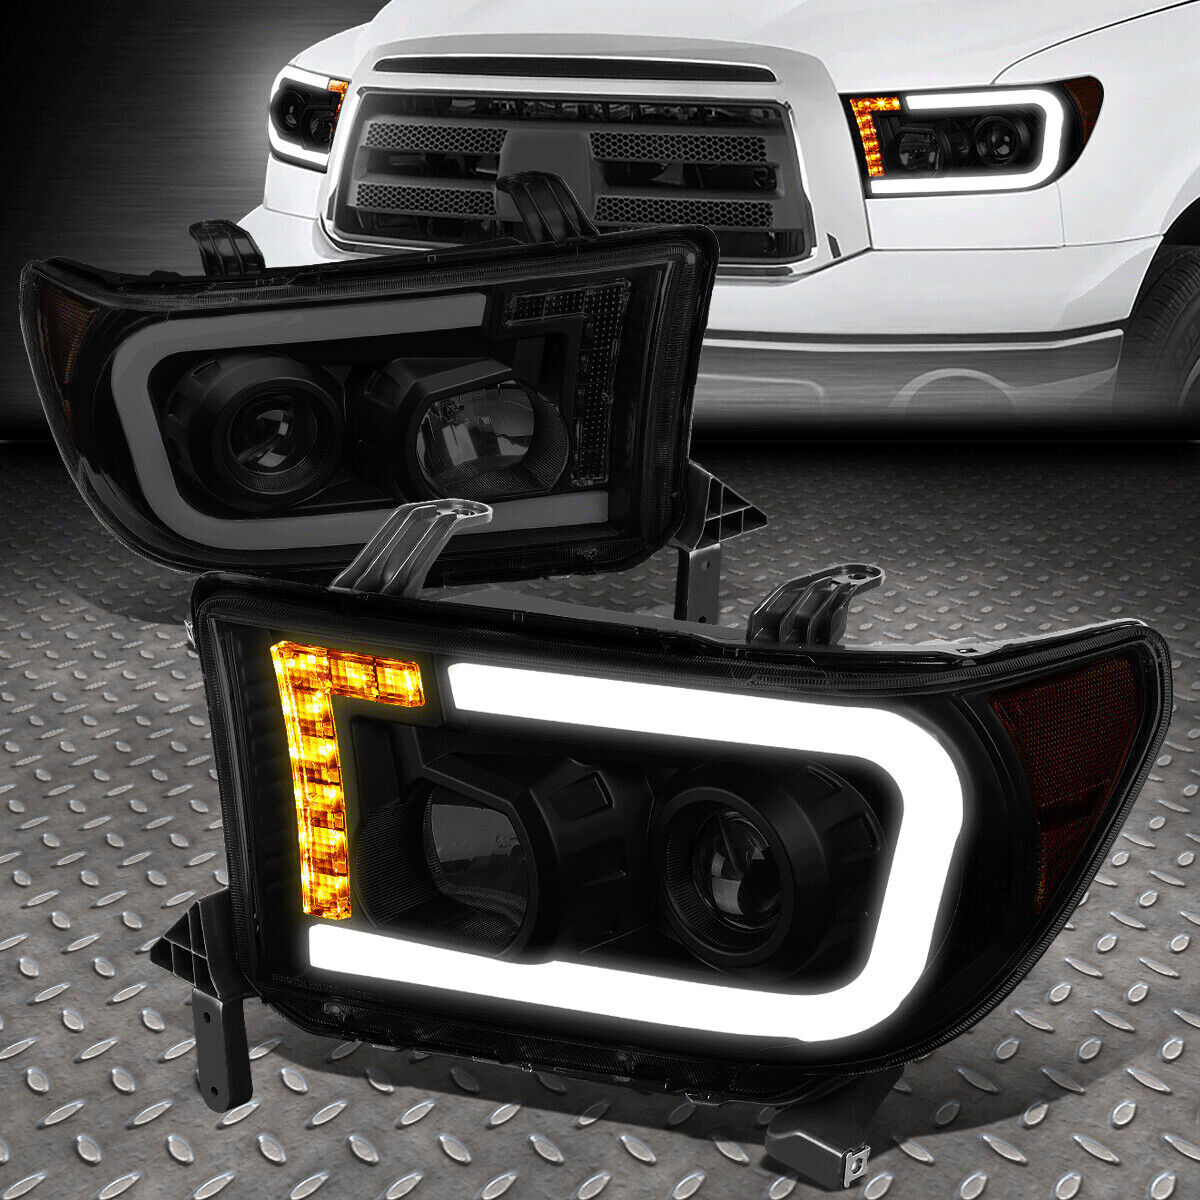 FOR 07-13 TOYOTA TUNDRA FRONT LED DRL+TURN SIGNAL PROJECTOR HEADLIGHT LAMPS SET